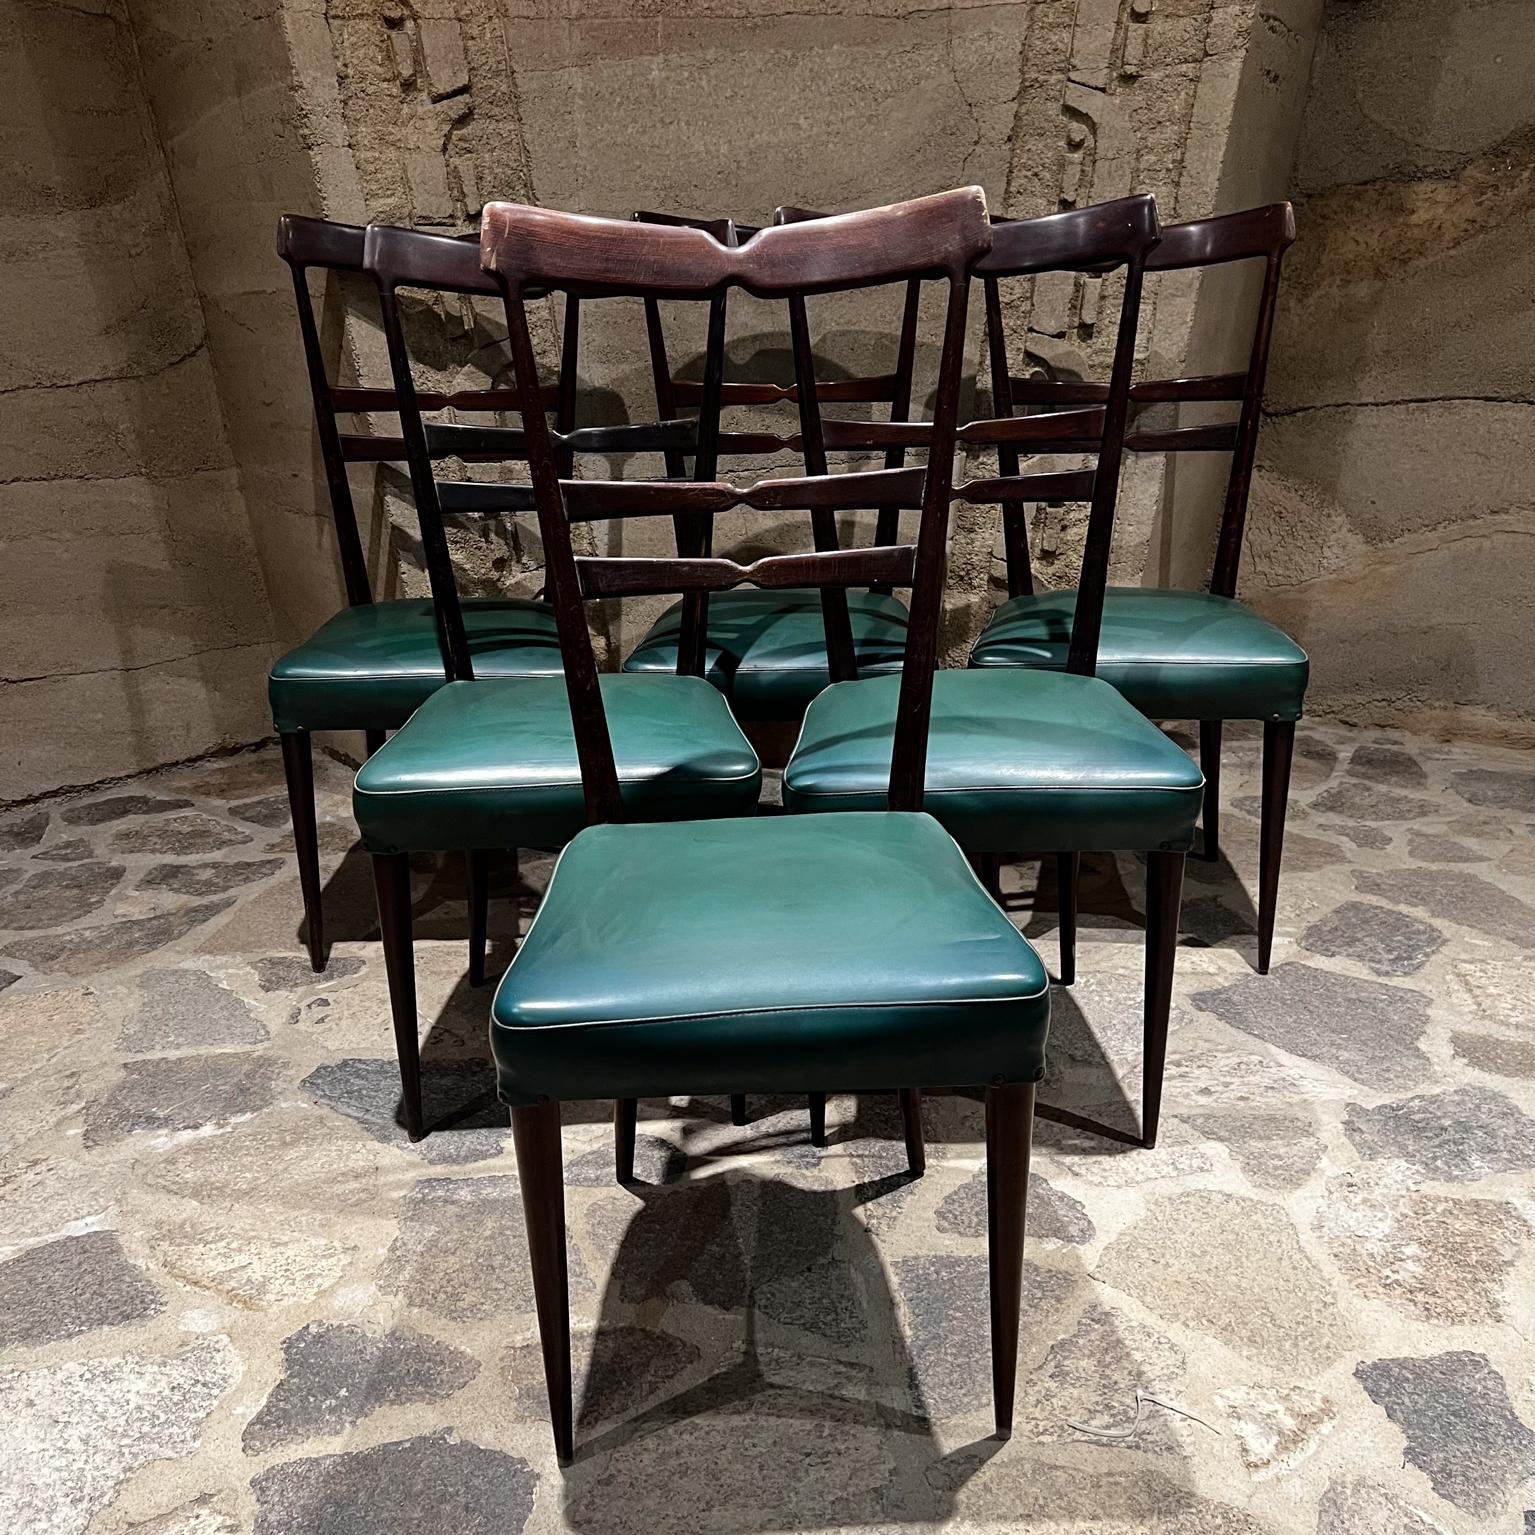 Set of 6 green dining chairs after Ico Parisi
Made in Italy circa the 1950s.
Unmarked
Dark wood mahogany finish.
Original green Naugahyde.
Firm and sturdy.
41.25 h x 20.5 d x 17.75 w Seat 18.5 h
Original vintage unrestored condition.
Please expect